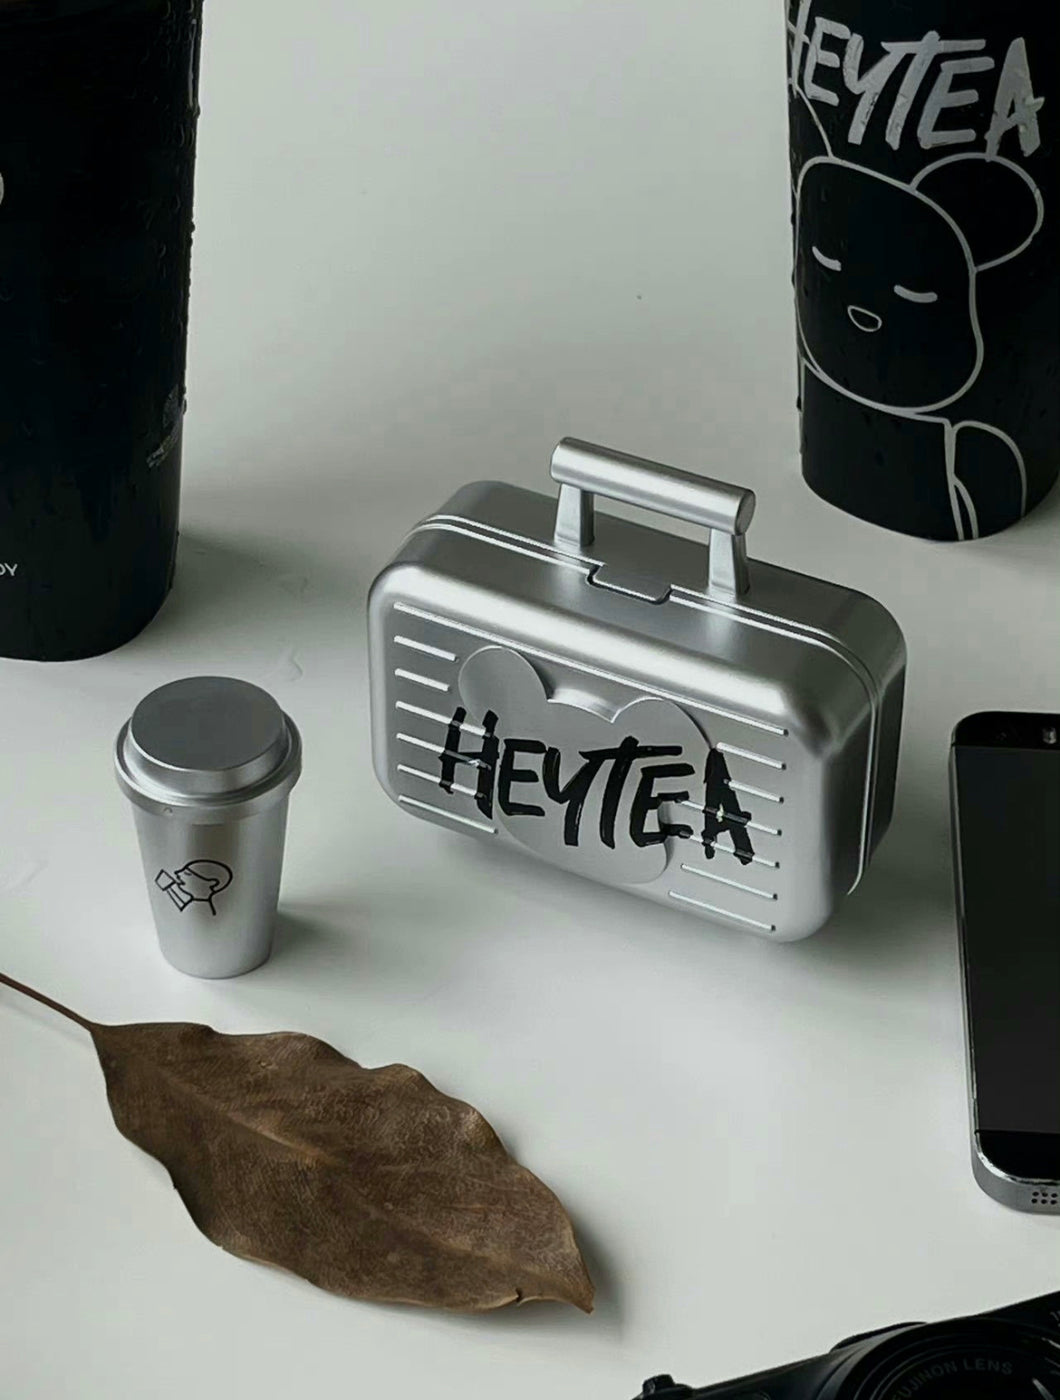 HEYTEA x BE@RBRICK 400% suit case and cup accessories